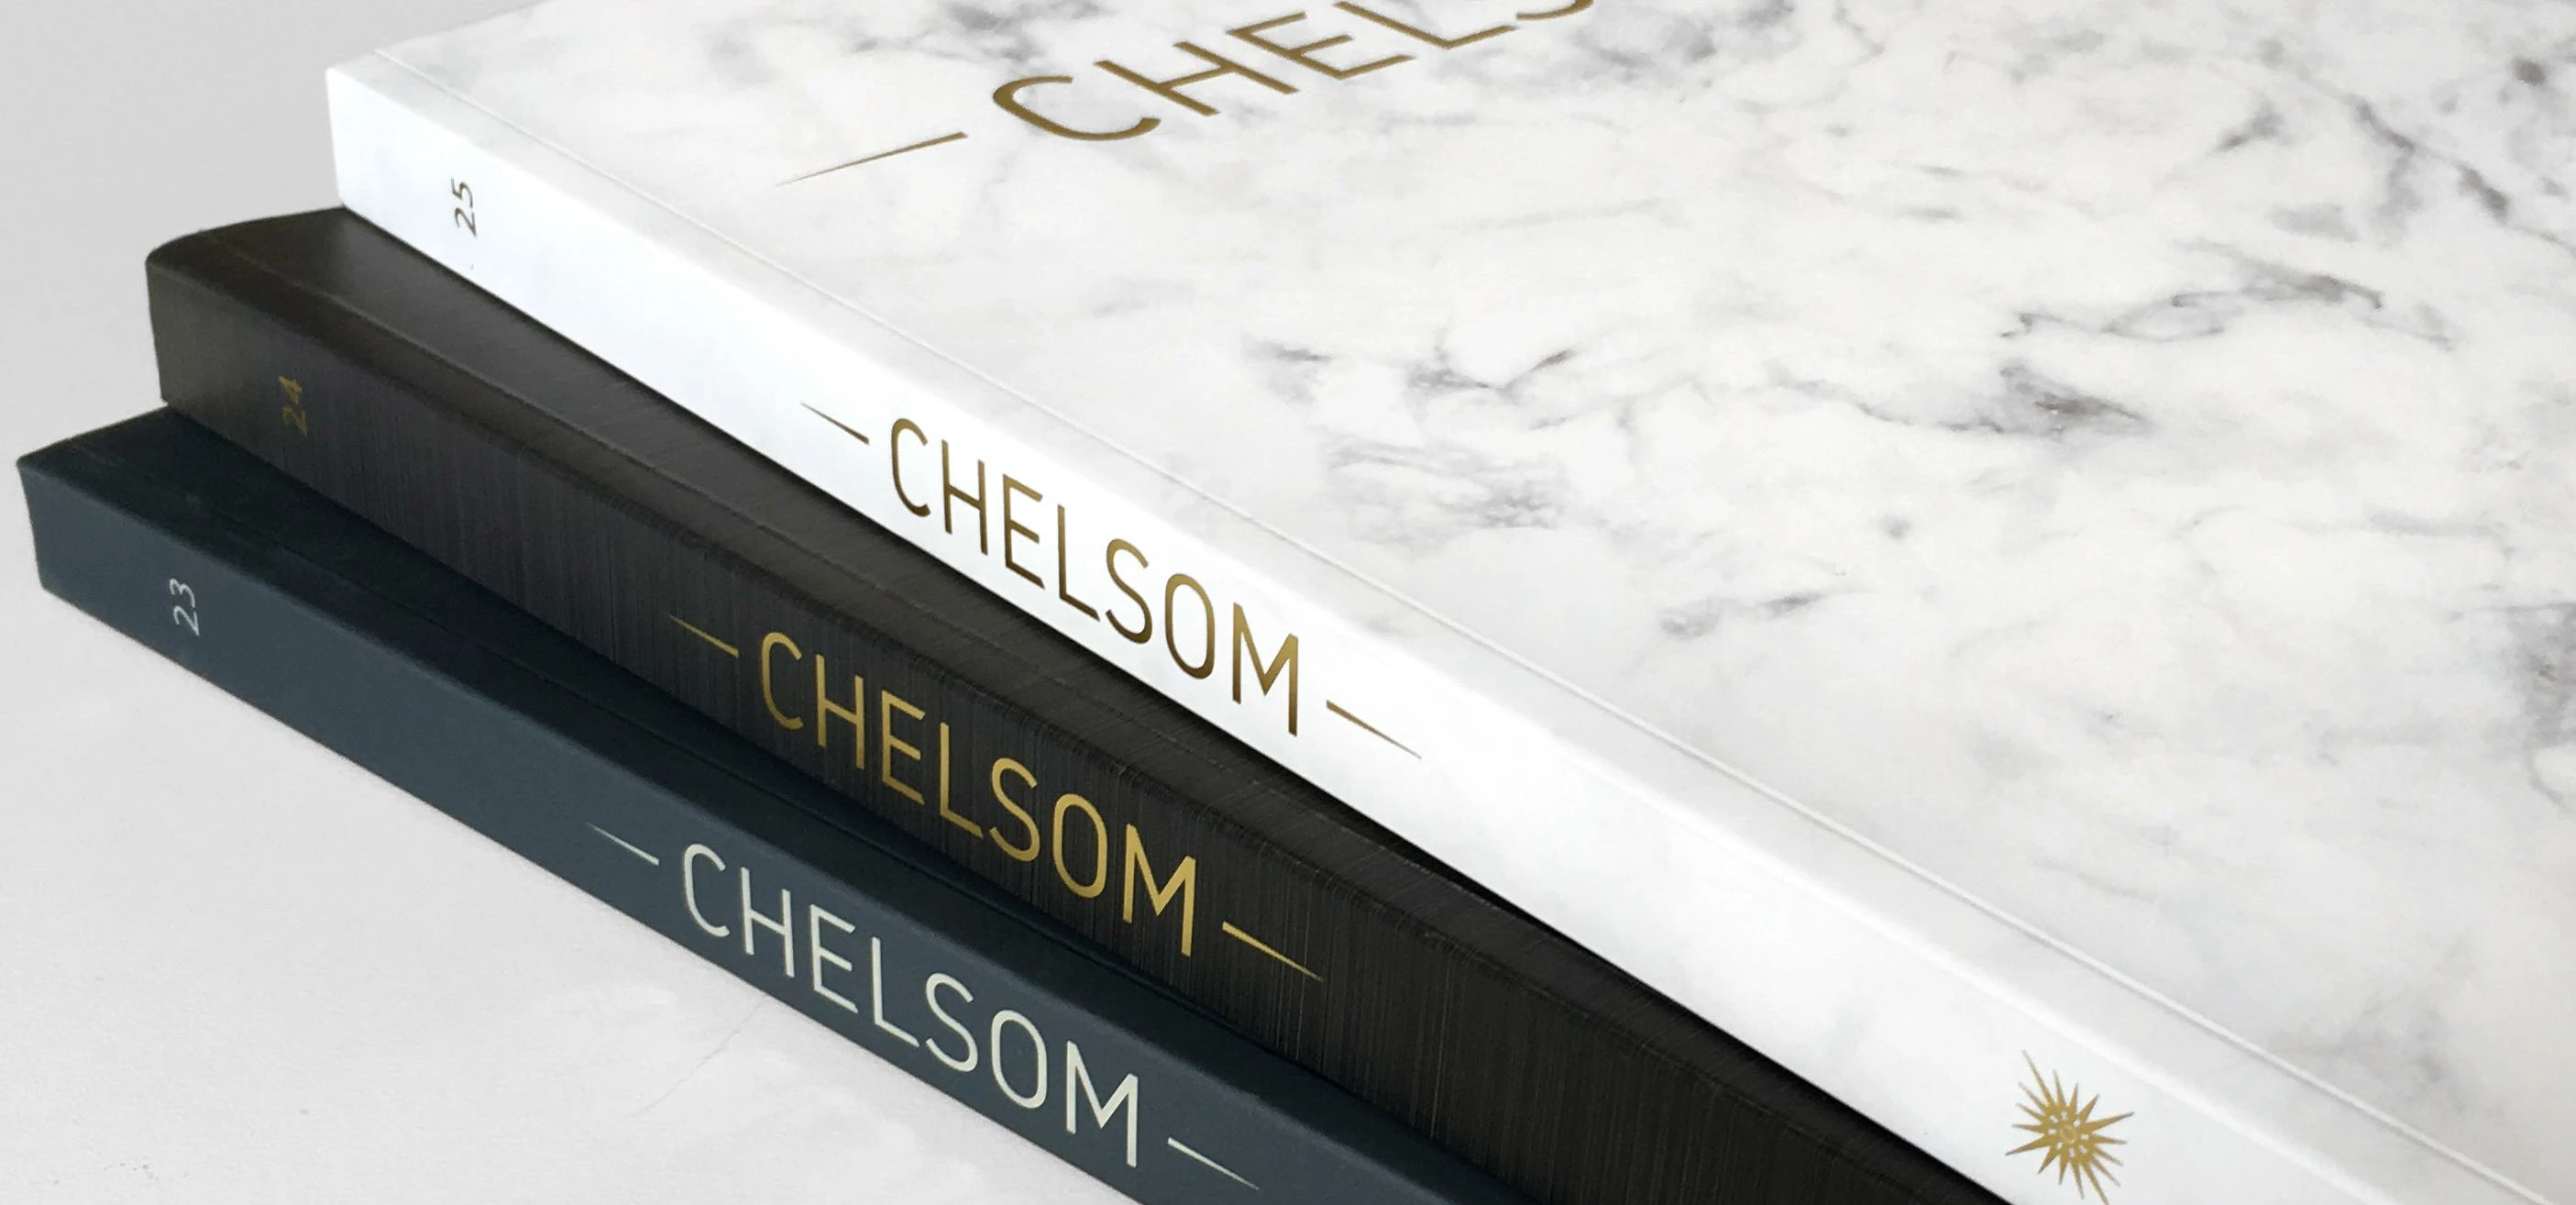 The Chelsom Lighting Catalogue